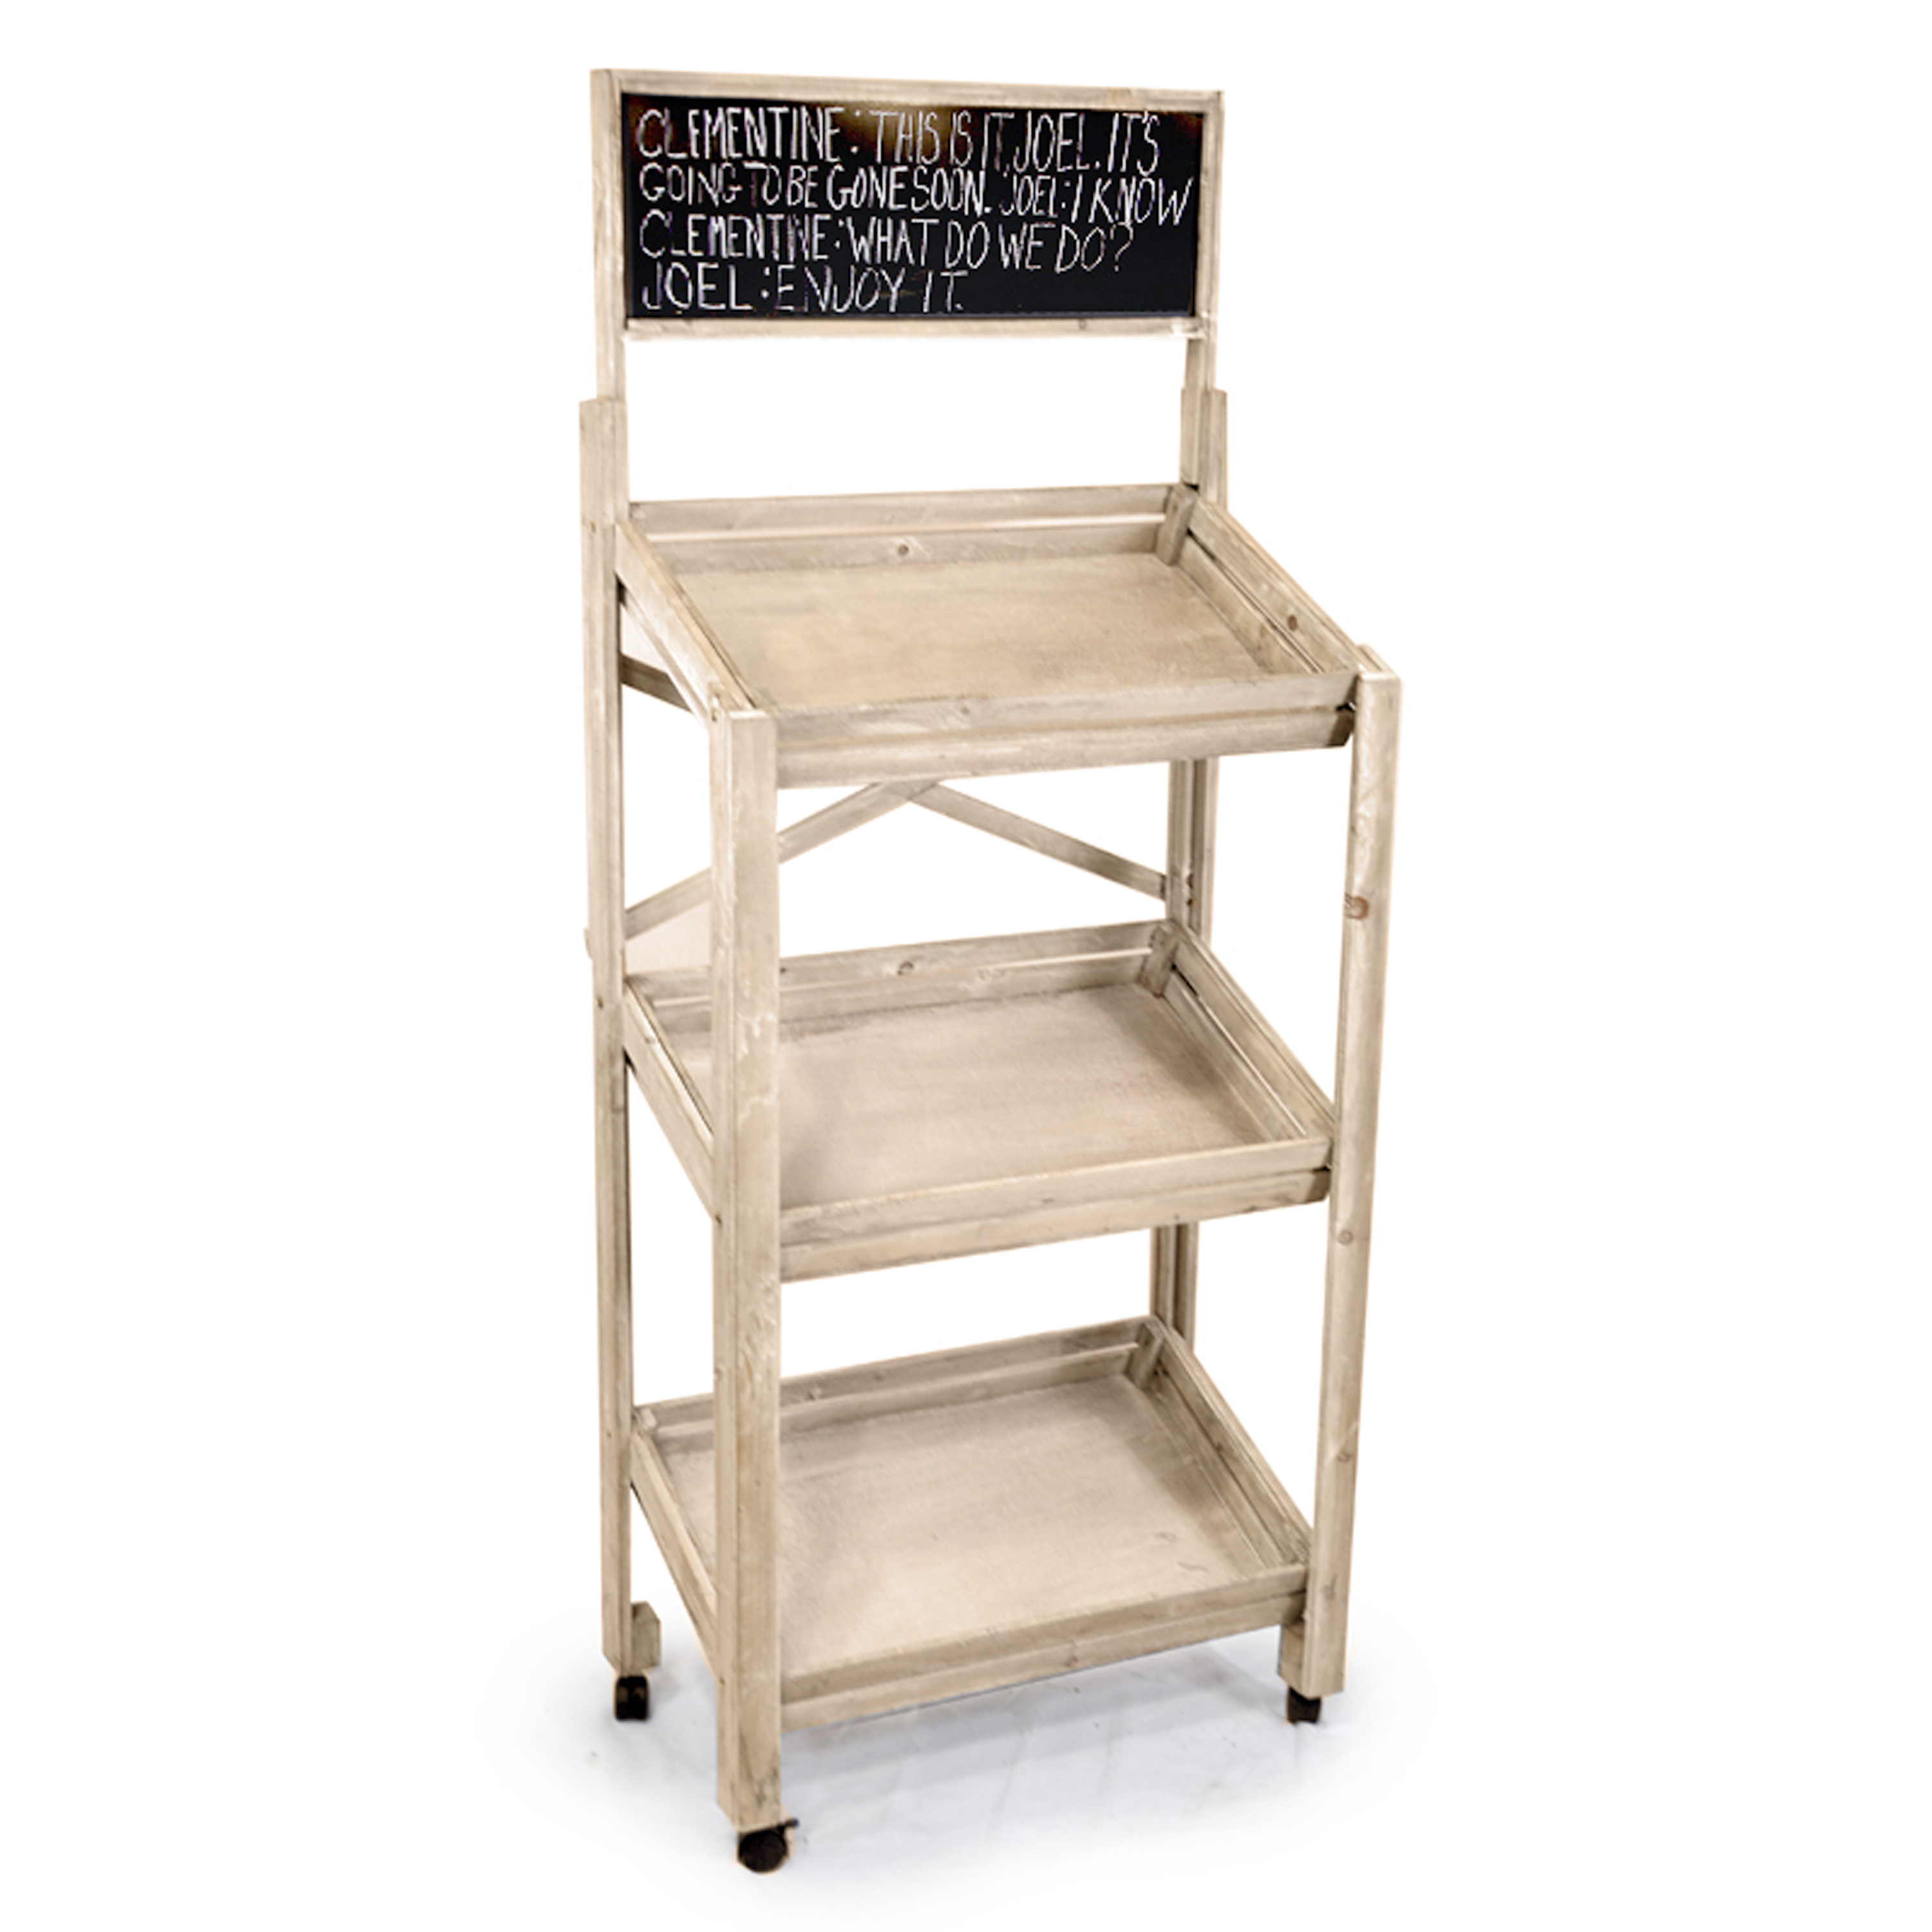 Wooden Three Shelf Display with Chalkboard and Wheels